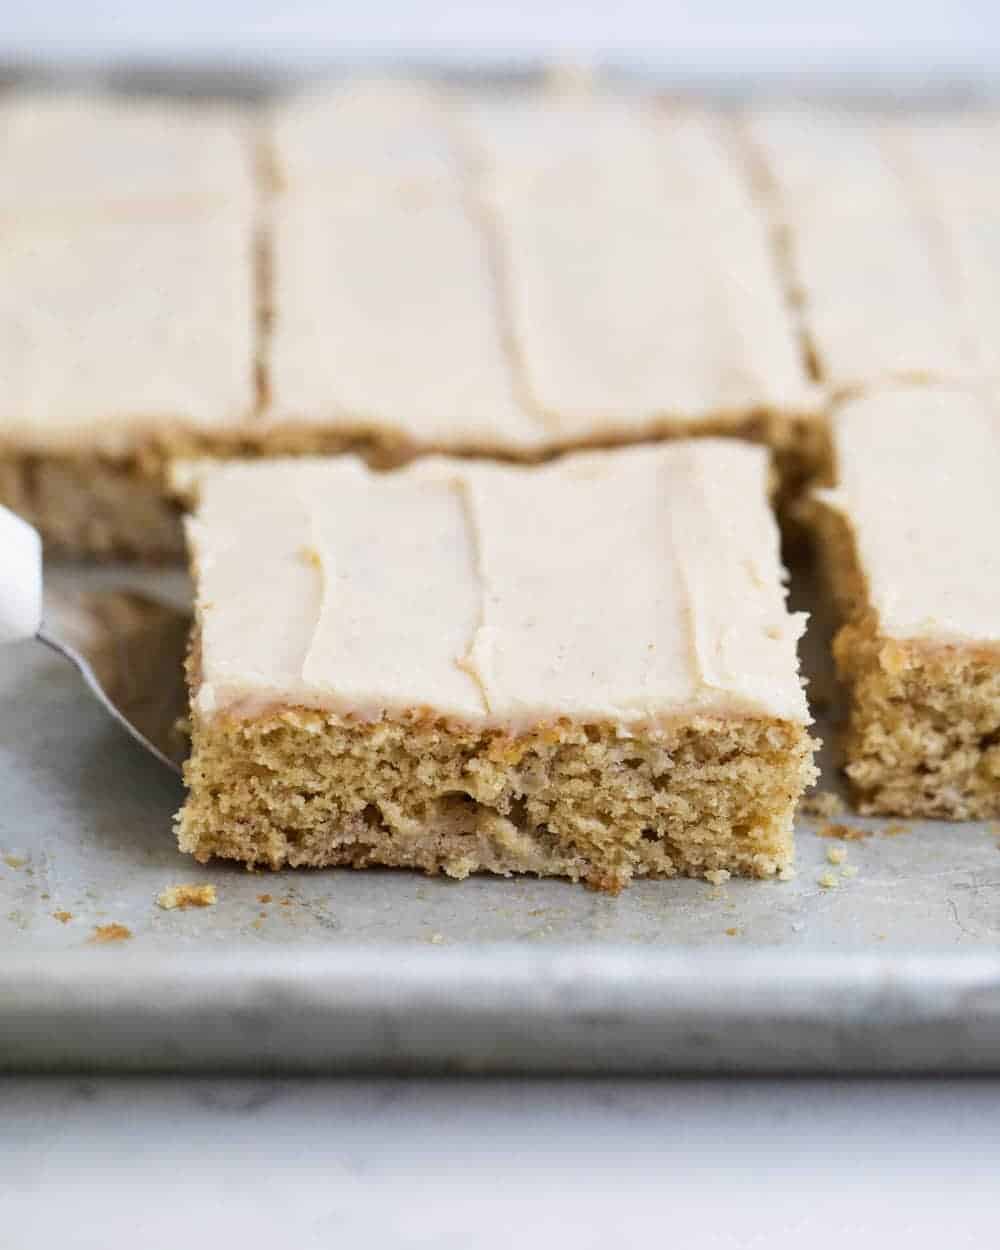 Slices of frosted banana bars on a baking sheet.